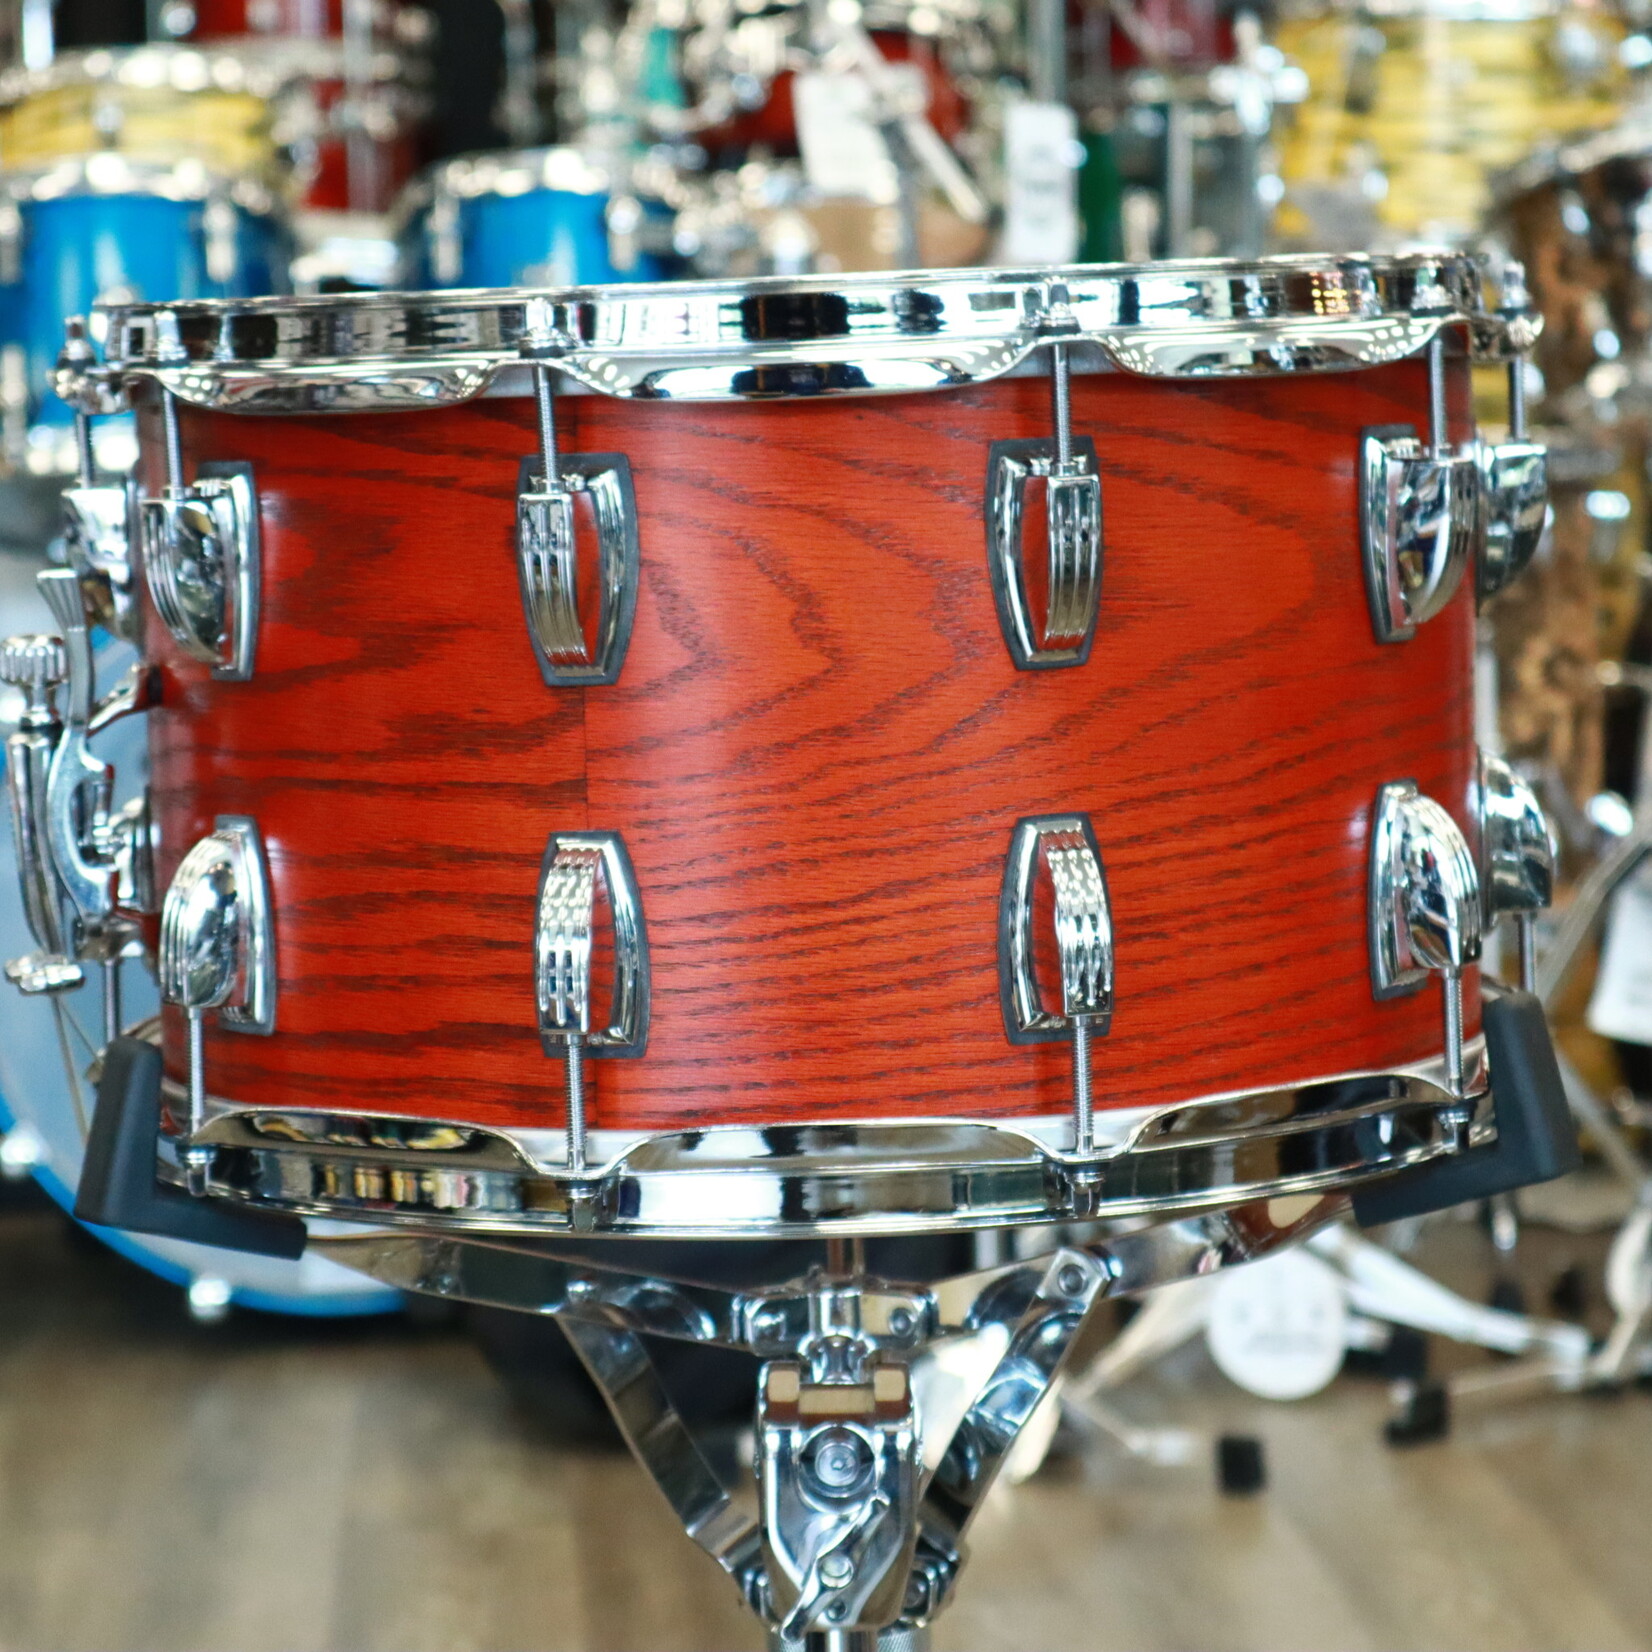 Ludwig Ludwig Classic Oak 8x14" Snare Drum (Tennessee Whiskey)